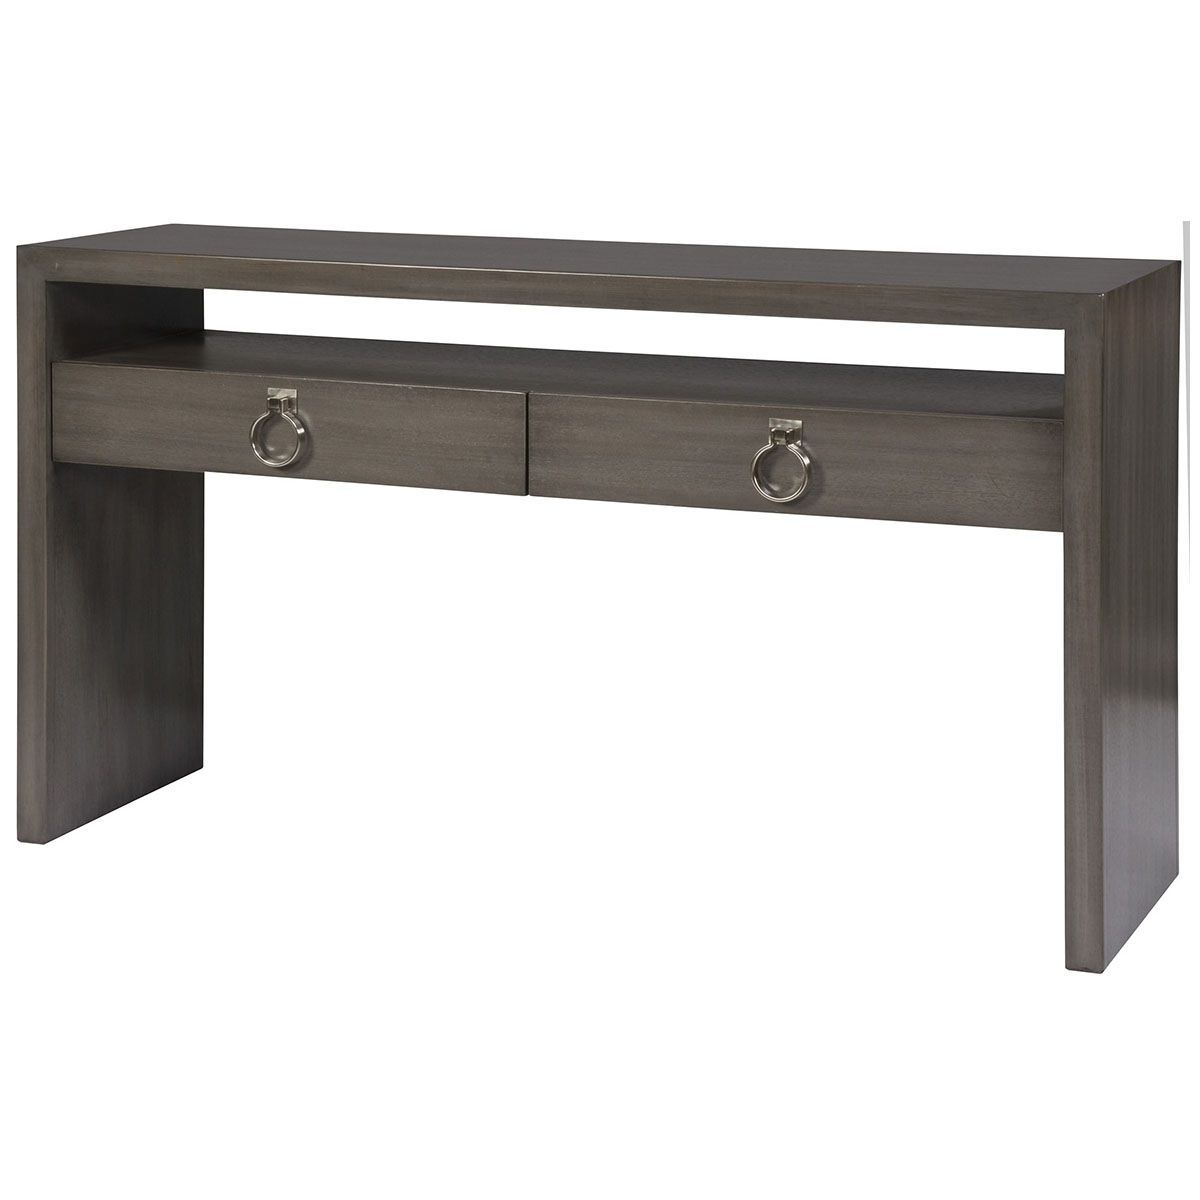 Vanguard Furniture Margo Console W349s Lg | Vanguad Furniture Regarding Parsons Black Marble Top &amp; Dark Steel Base 48x16 Console Tables (View 12 of 20)